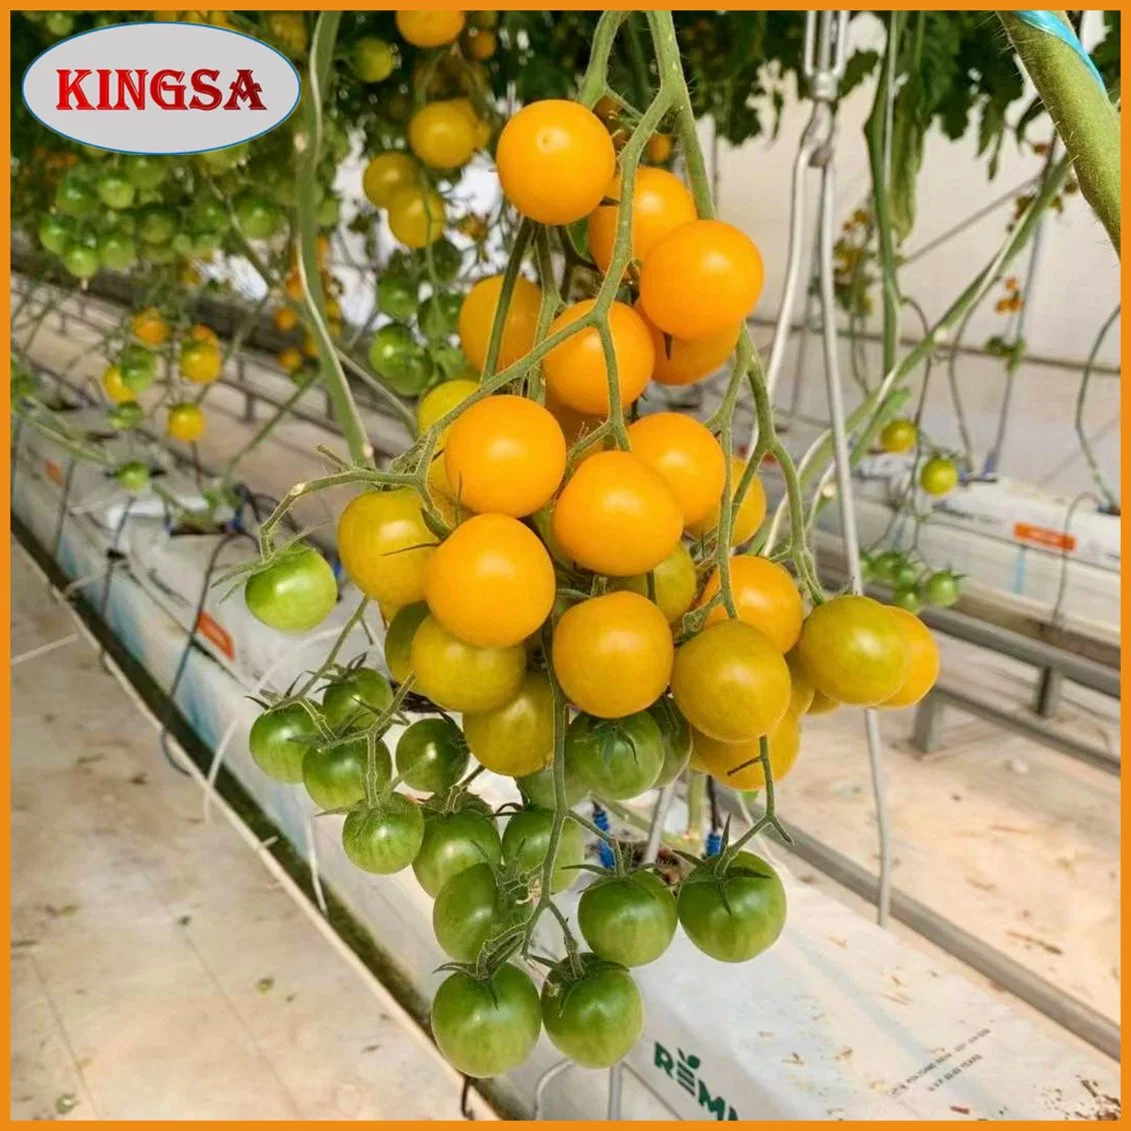 Multi-Span Arch Type PE/Po Plastic/Film Agricultural Greenhouse with Hydroponics System for Tomato/ Cucumber/ Lettuce/ Pepper